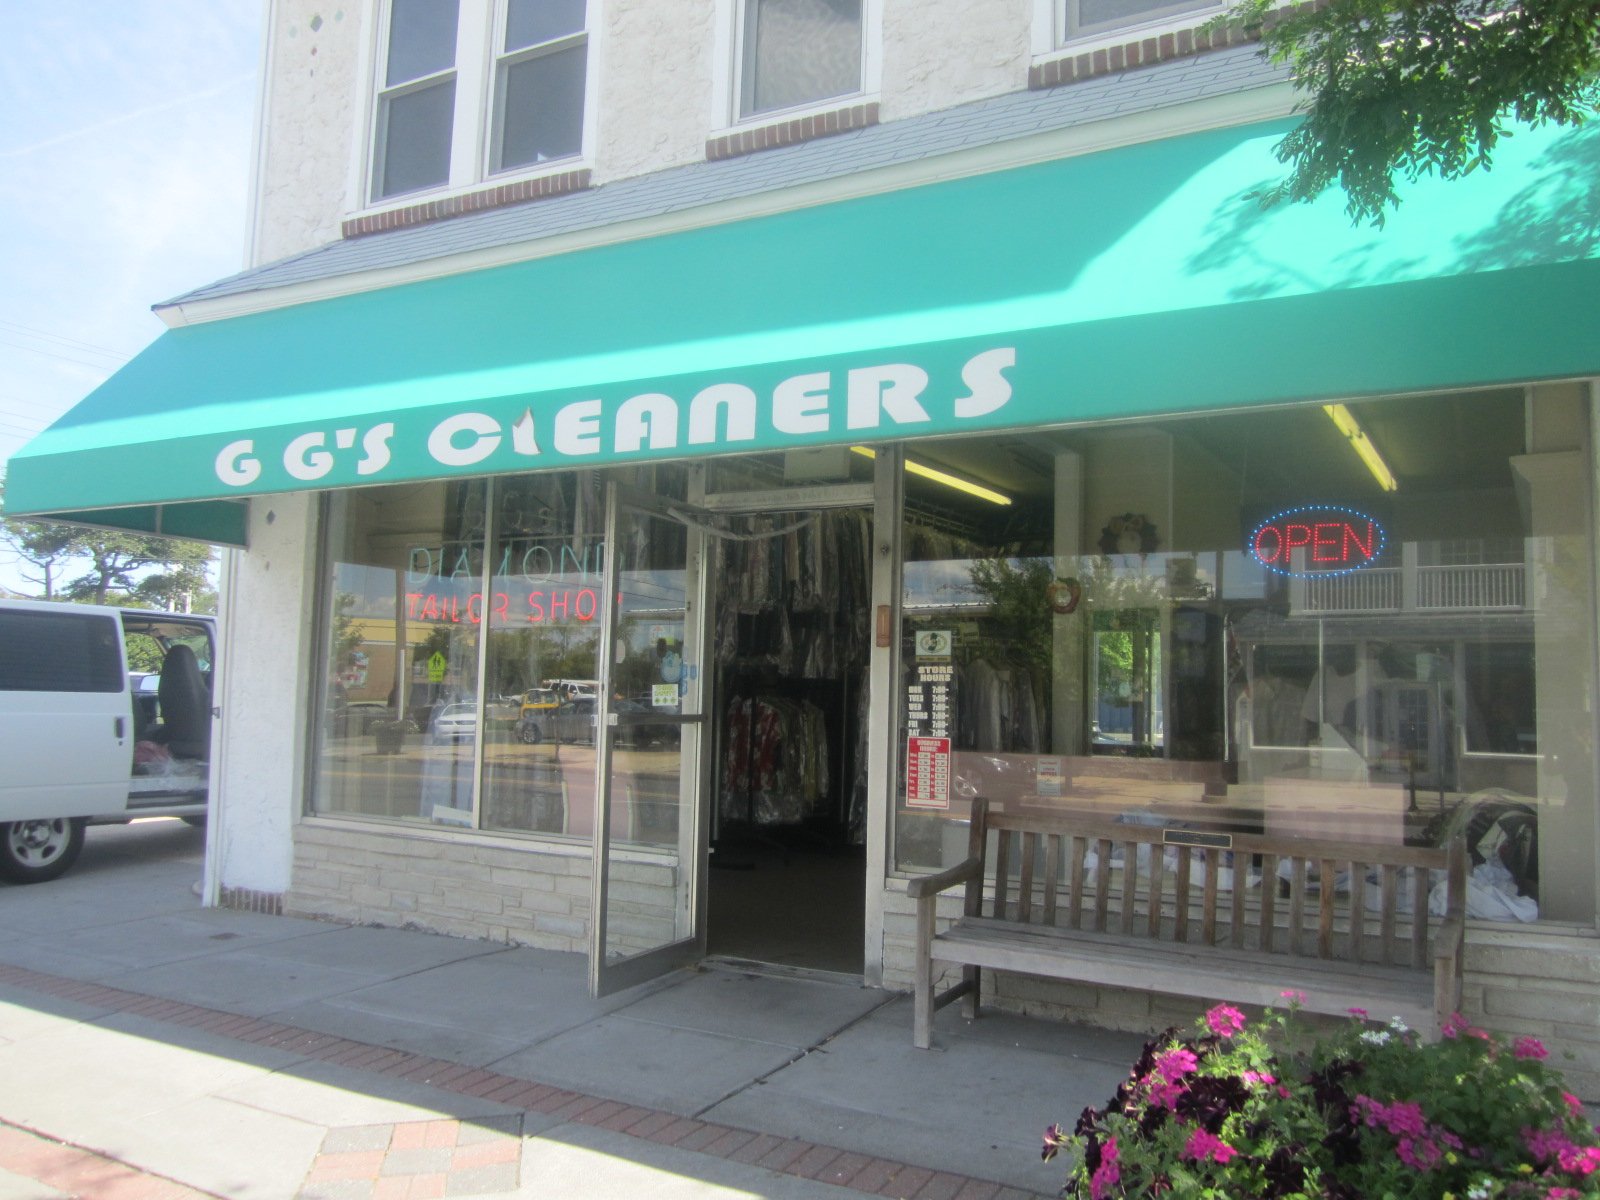 GG's Cleaners